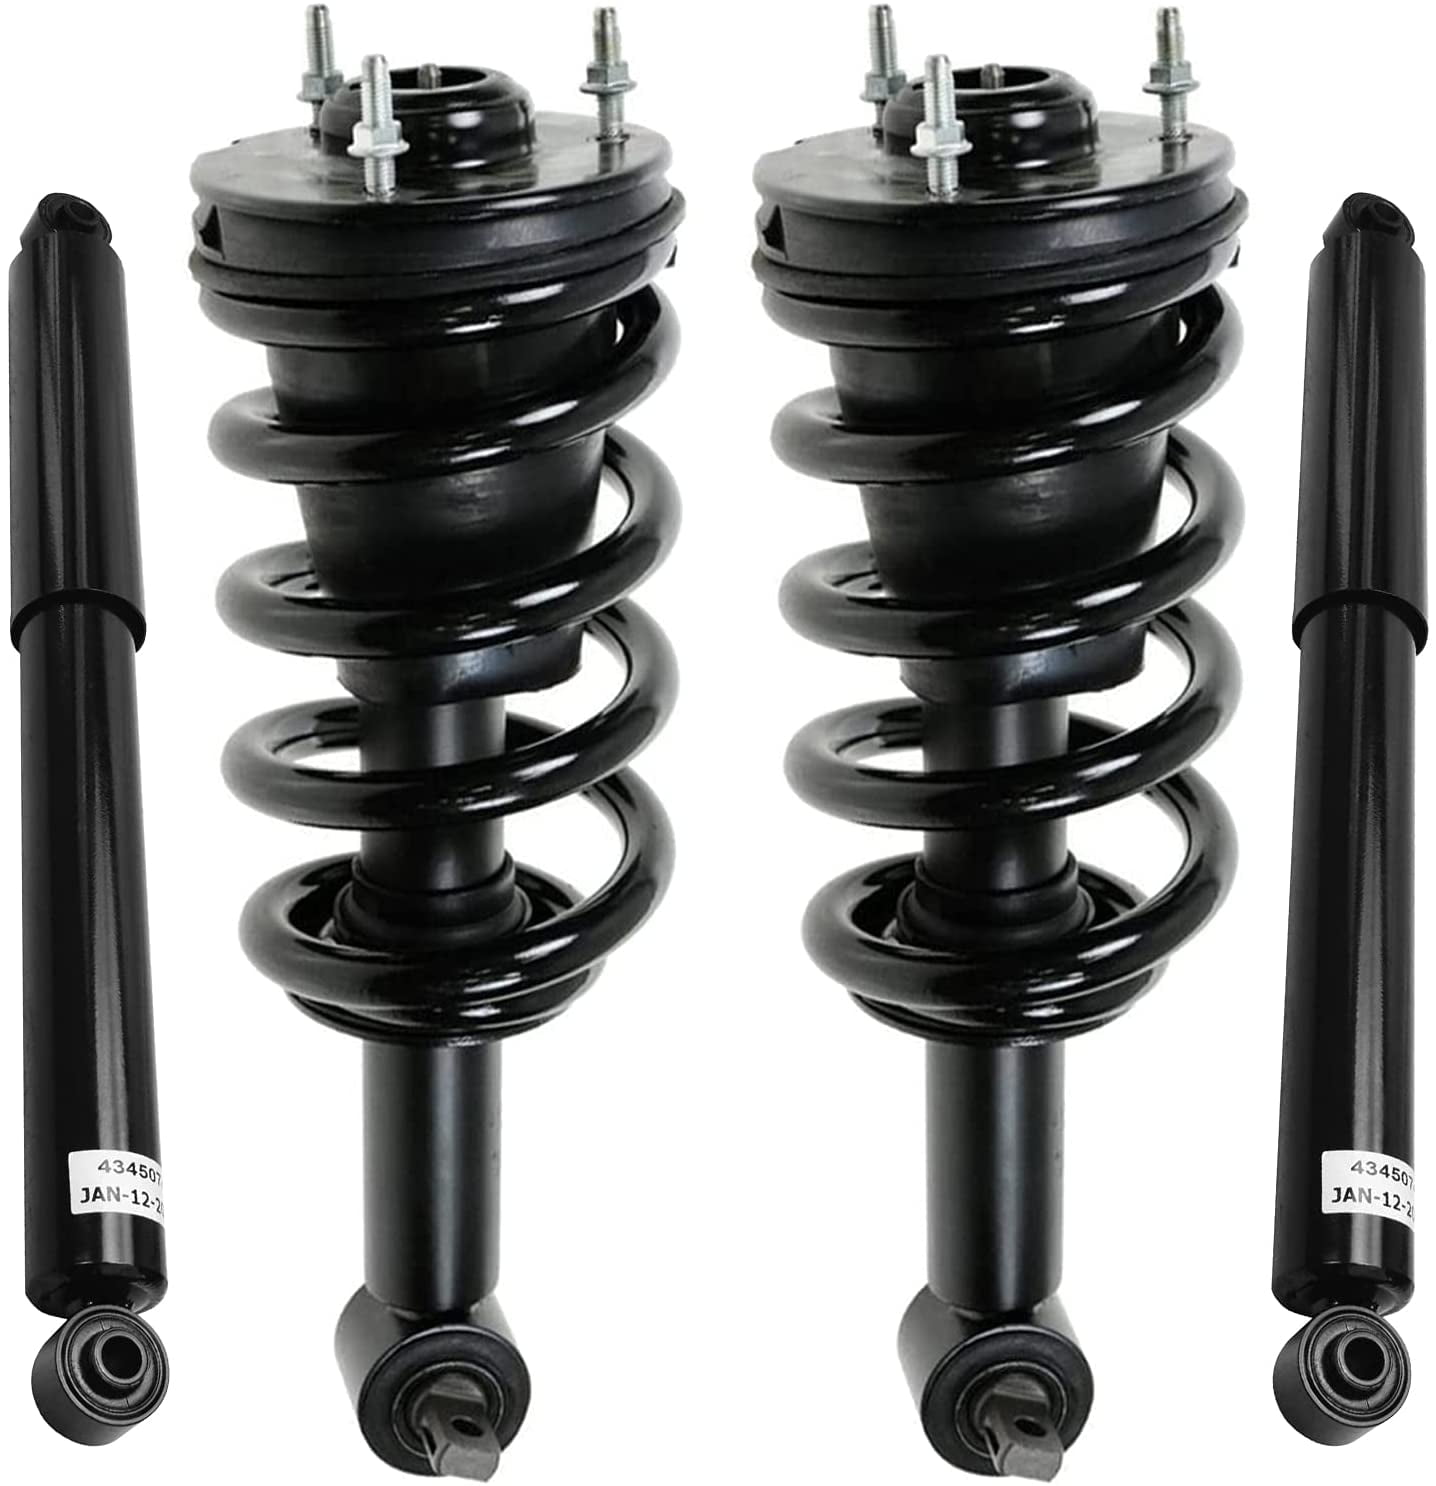 2 Not for Electronic Suspension Detroit Axle - 2007-13 Sierra/Silverado 1500 Both New Front Driver & Passenger Side Complete Strut & Spring Assembly - 